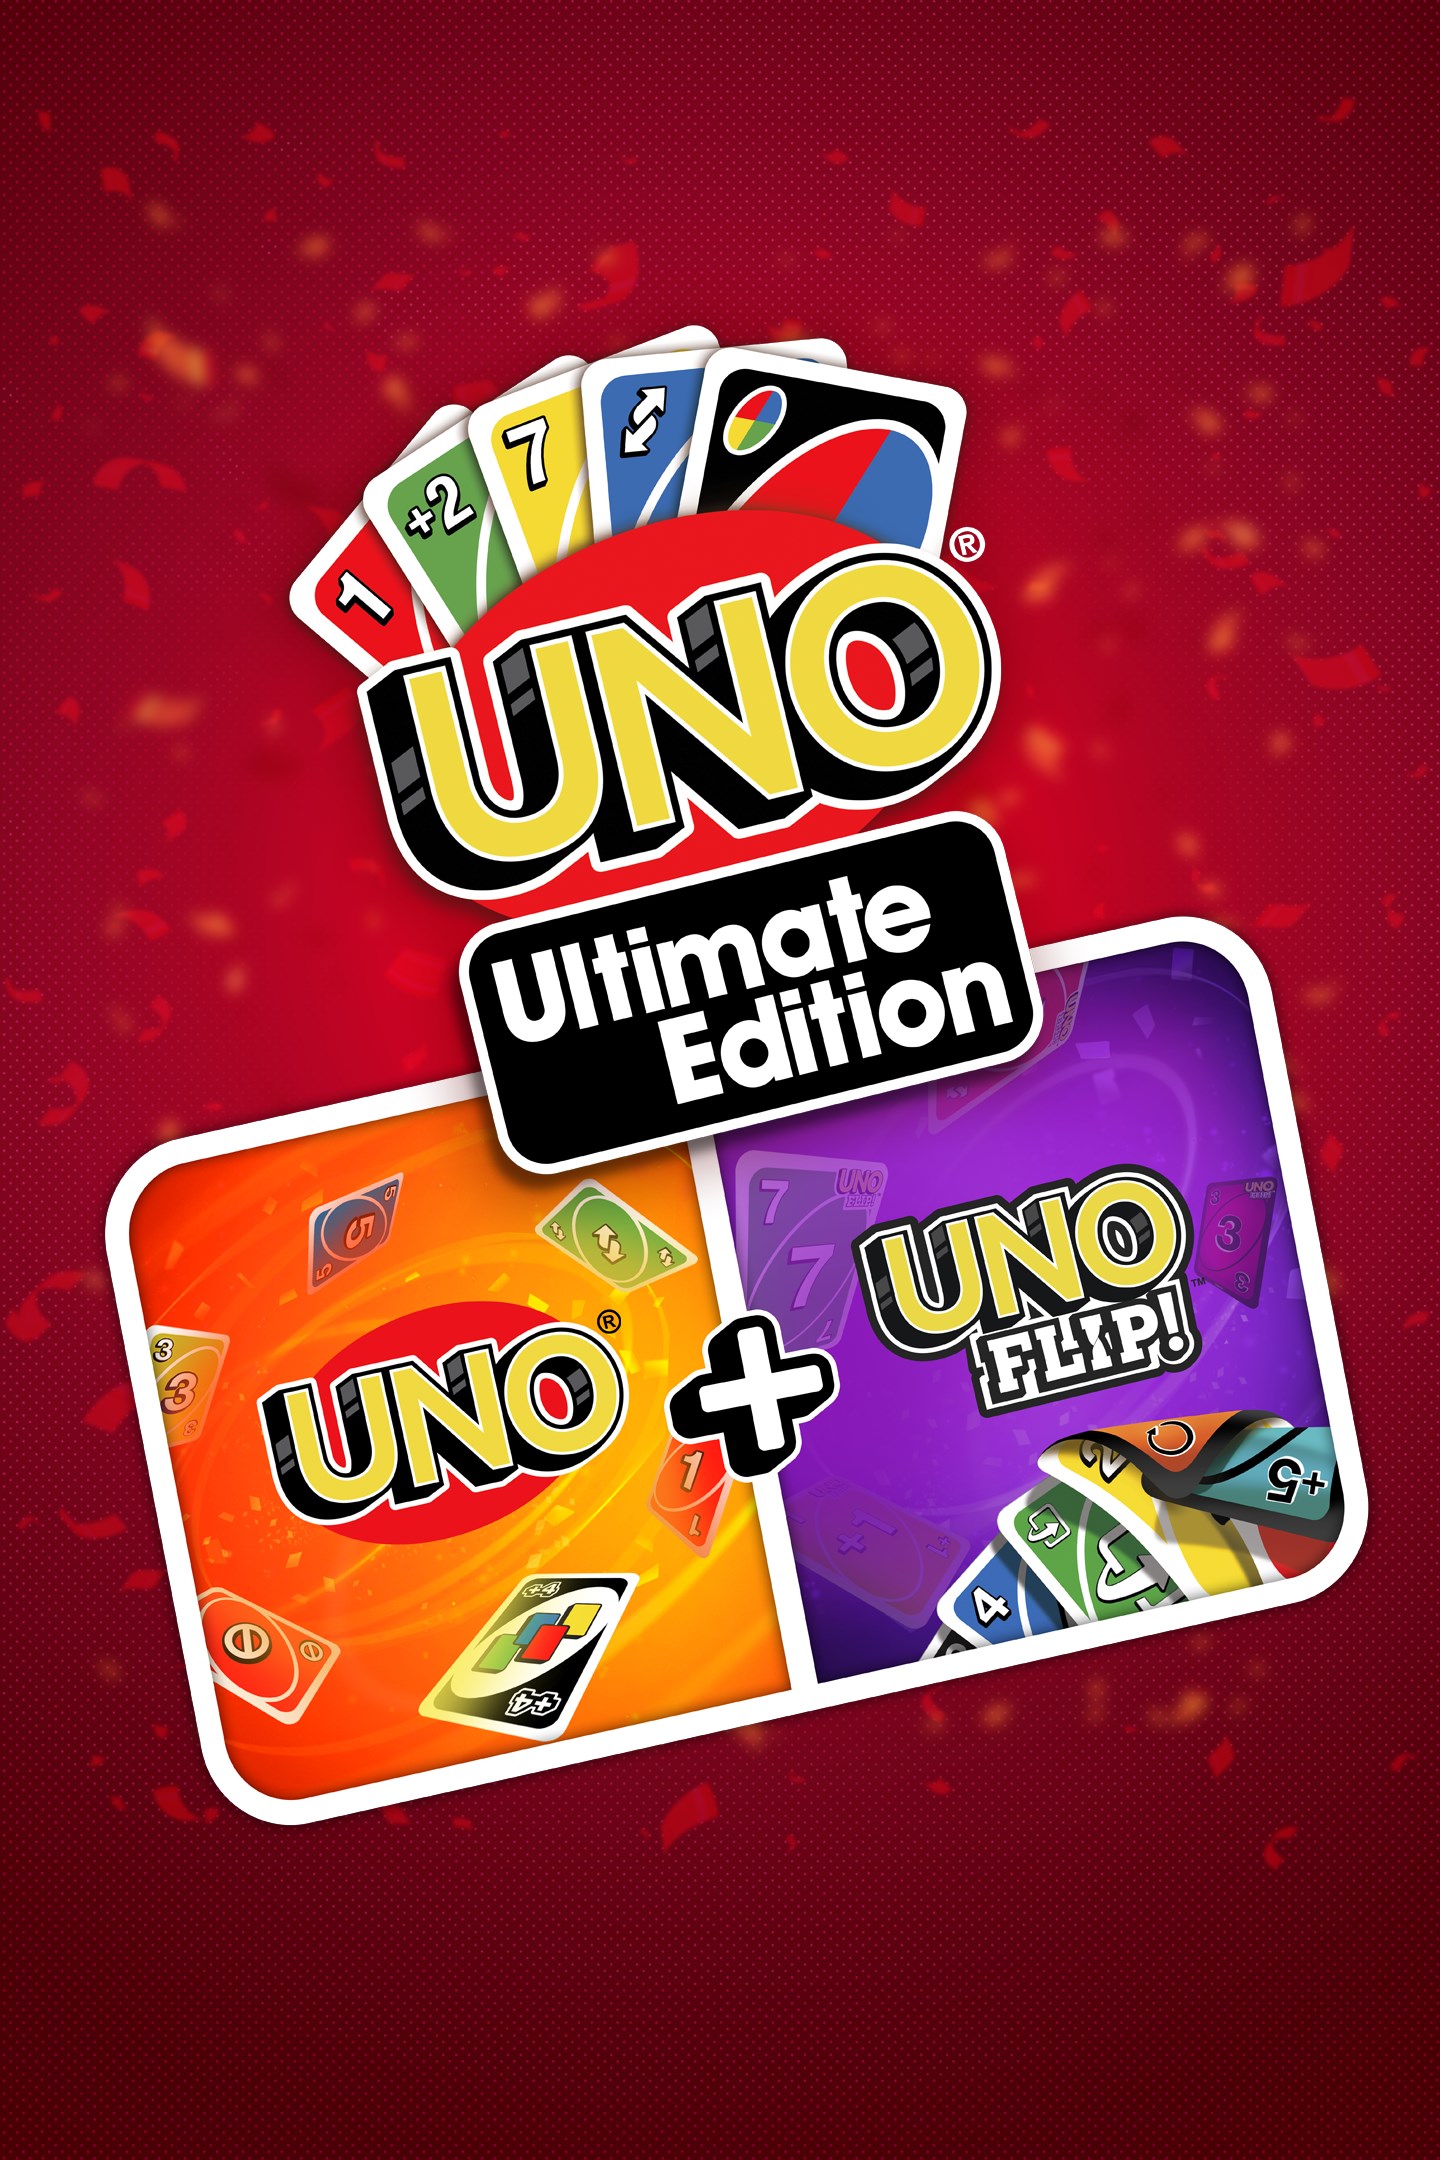 uno for xbox one